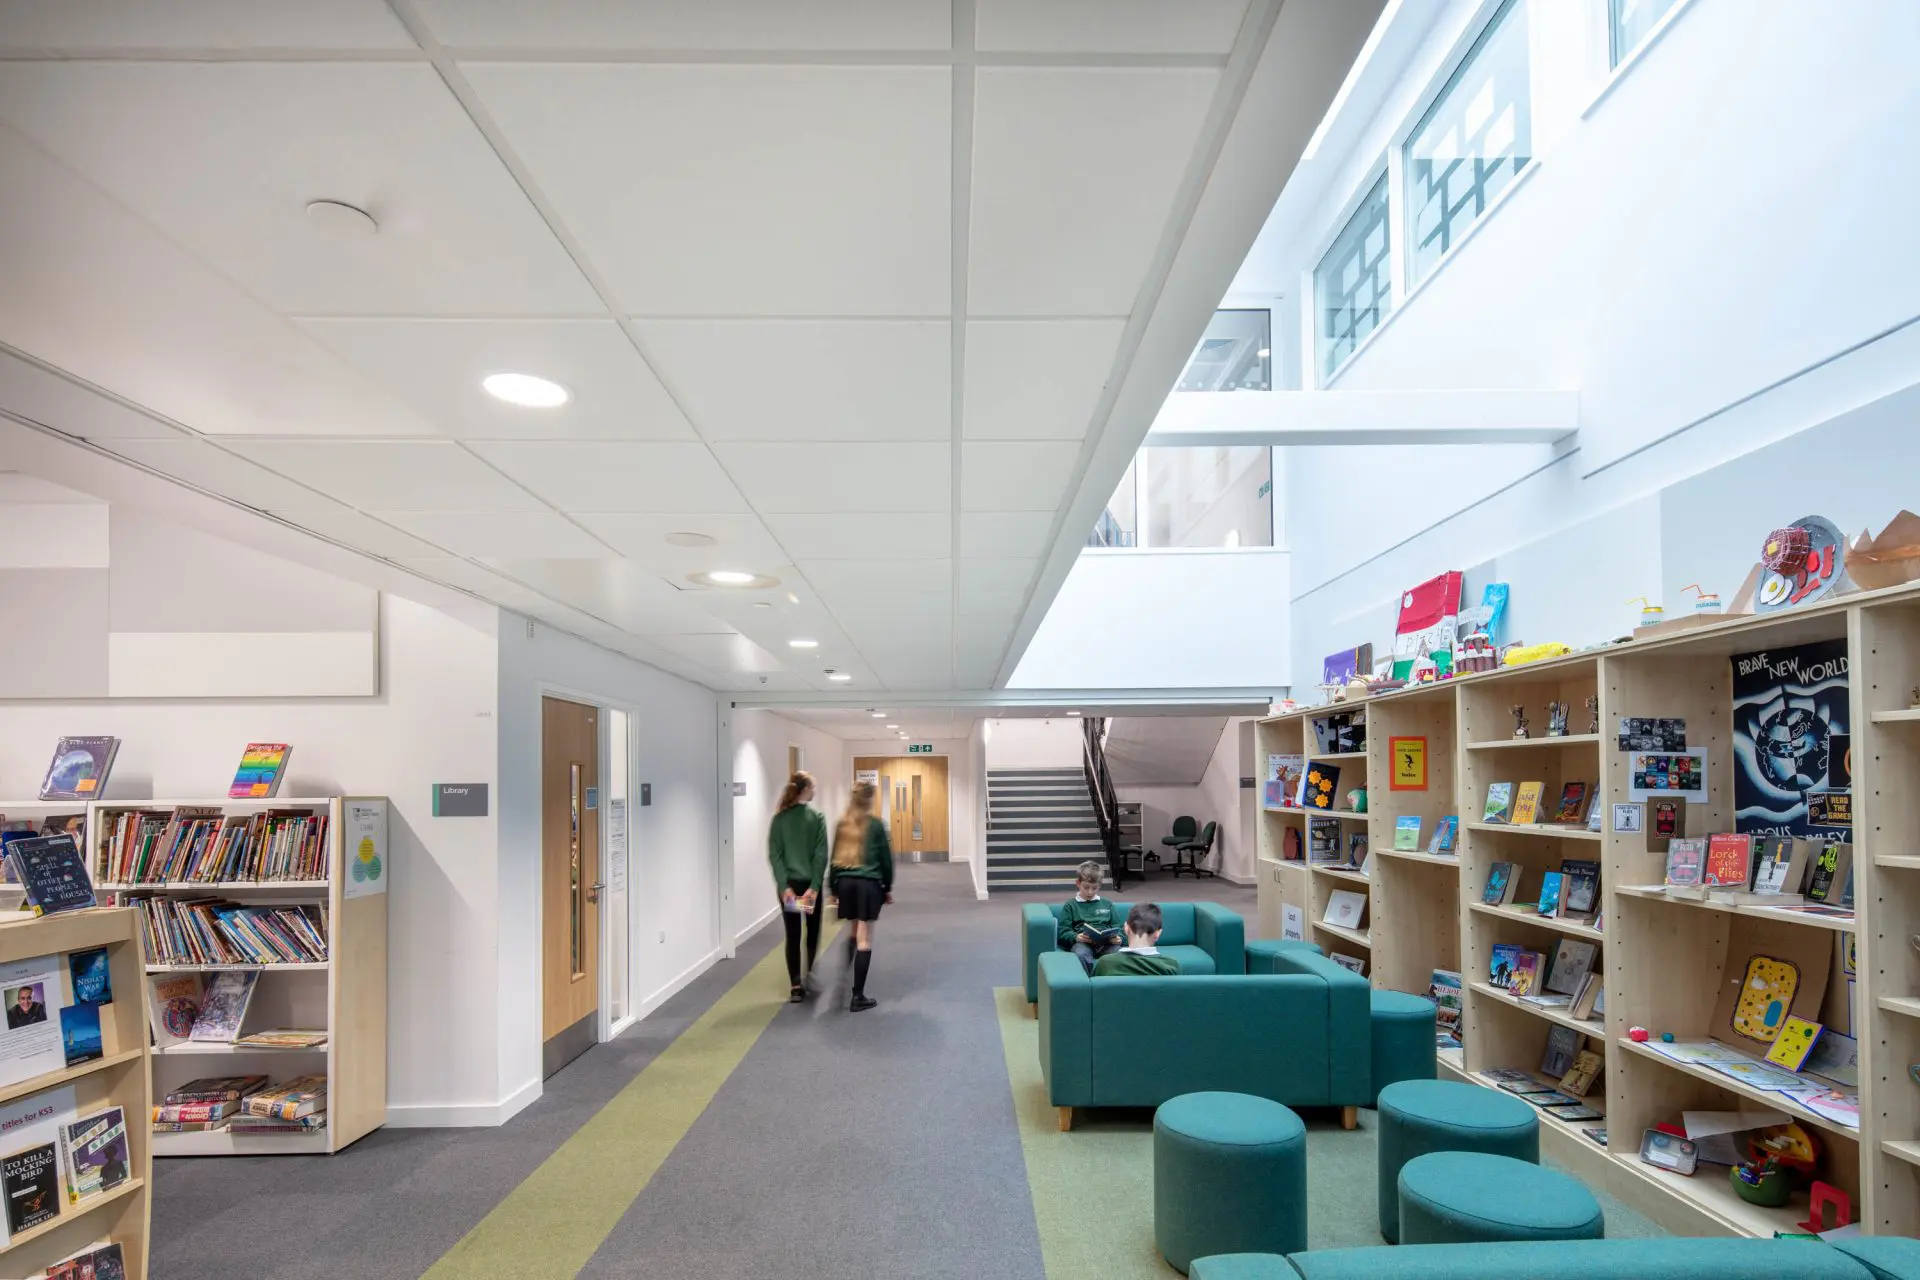 Learn how to specify ceilings for schools